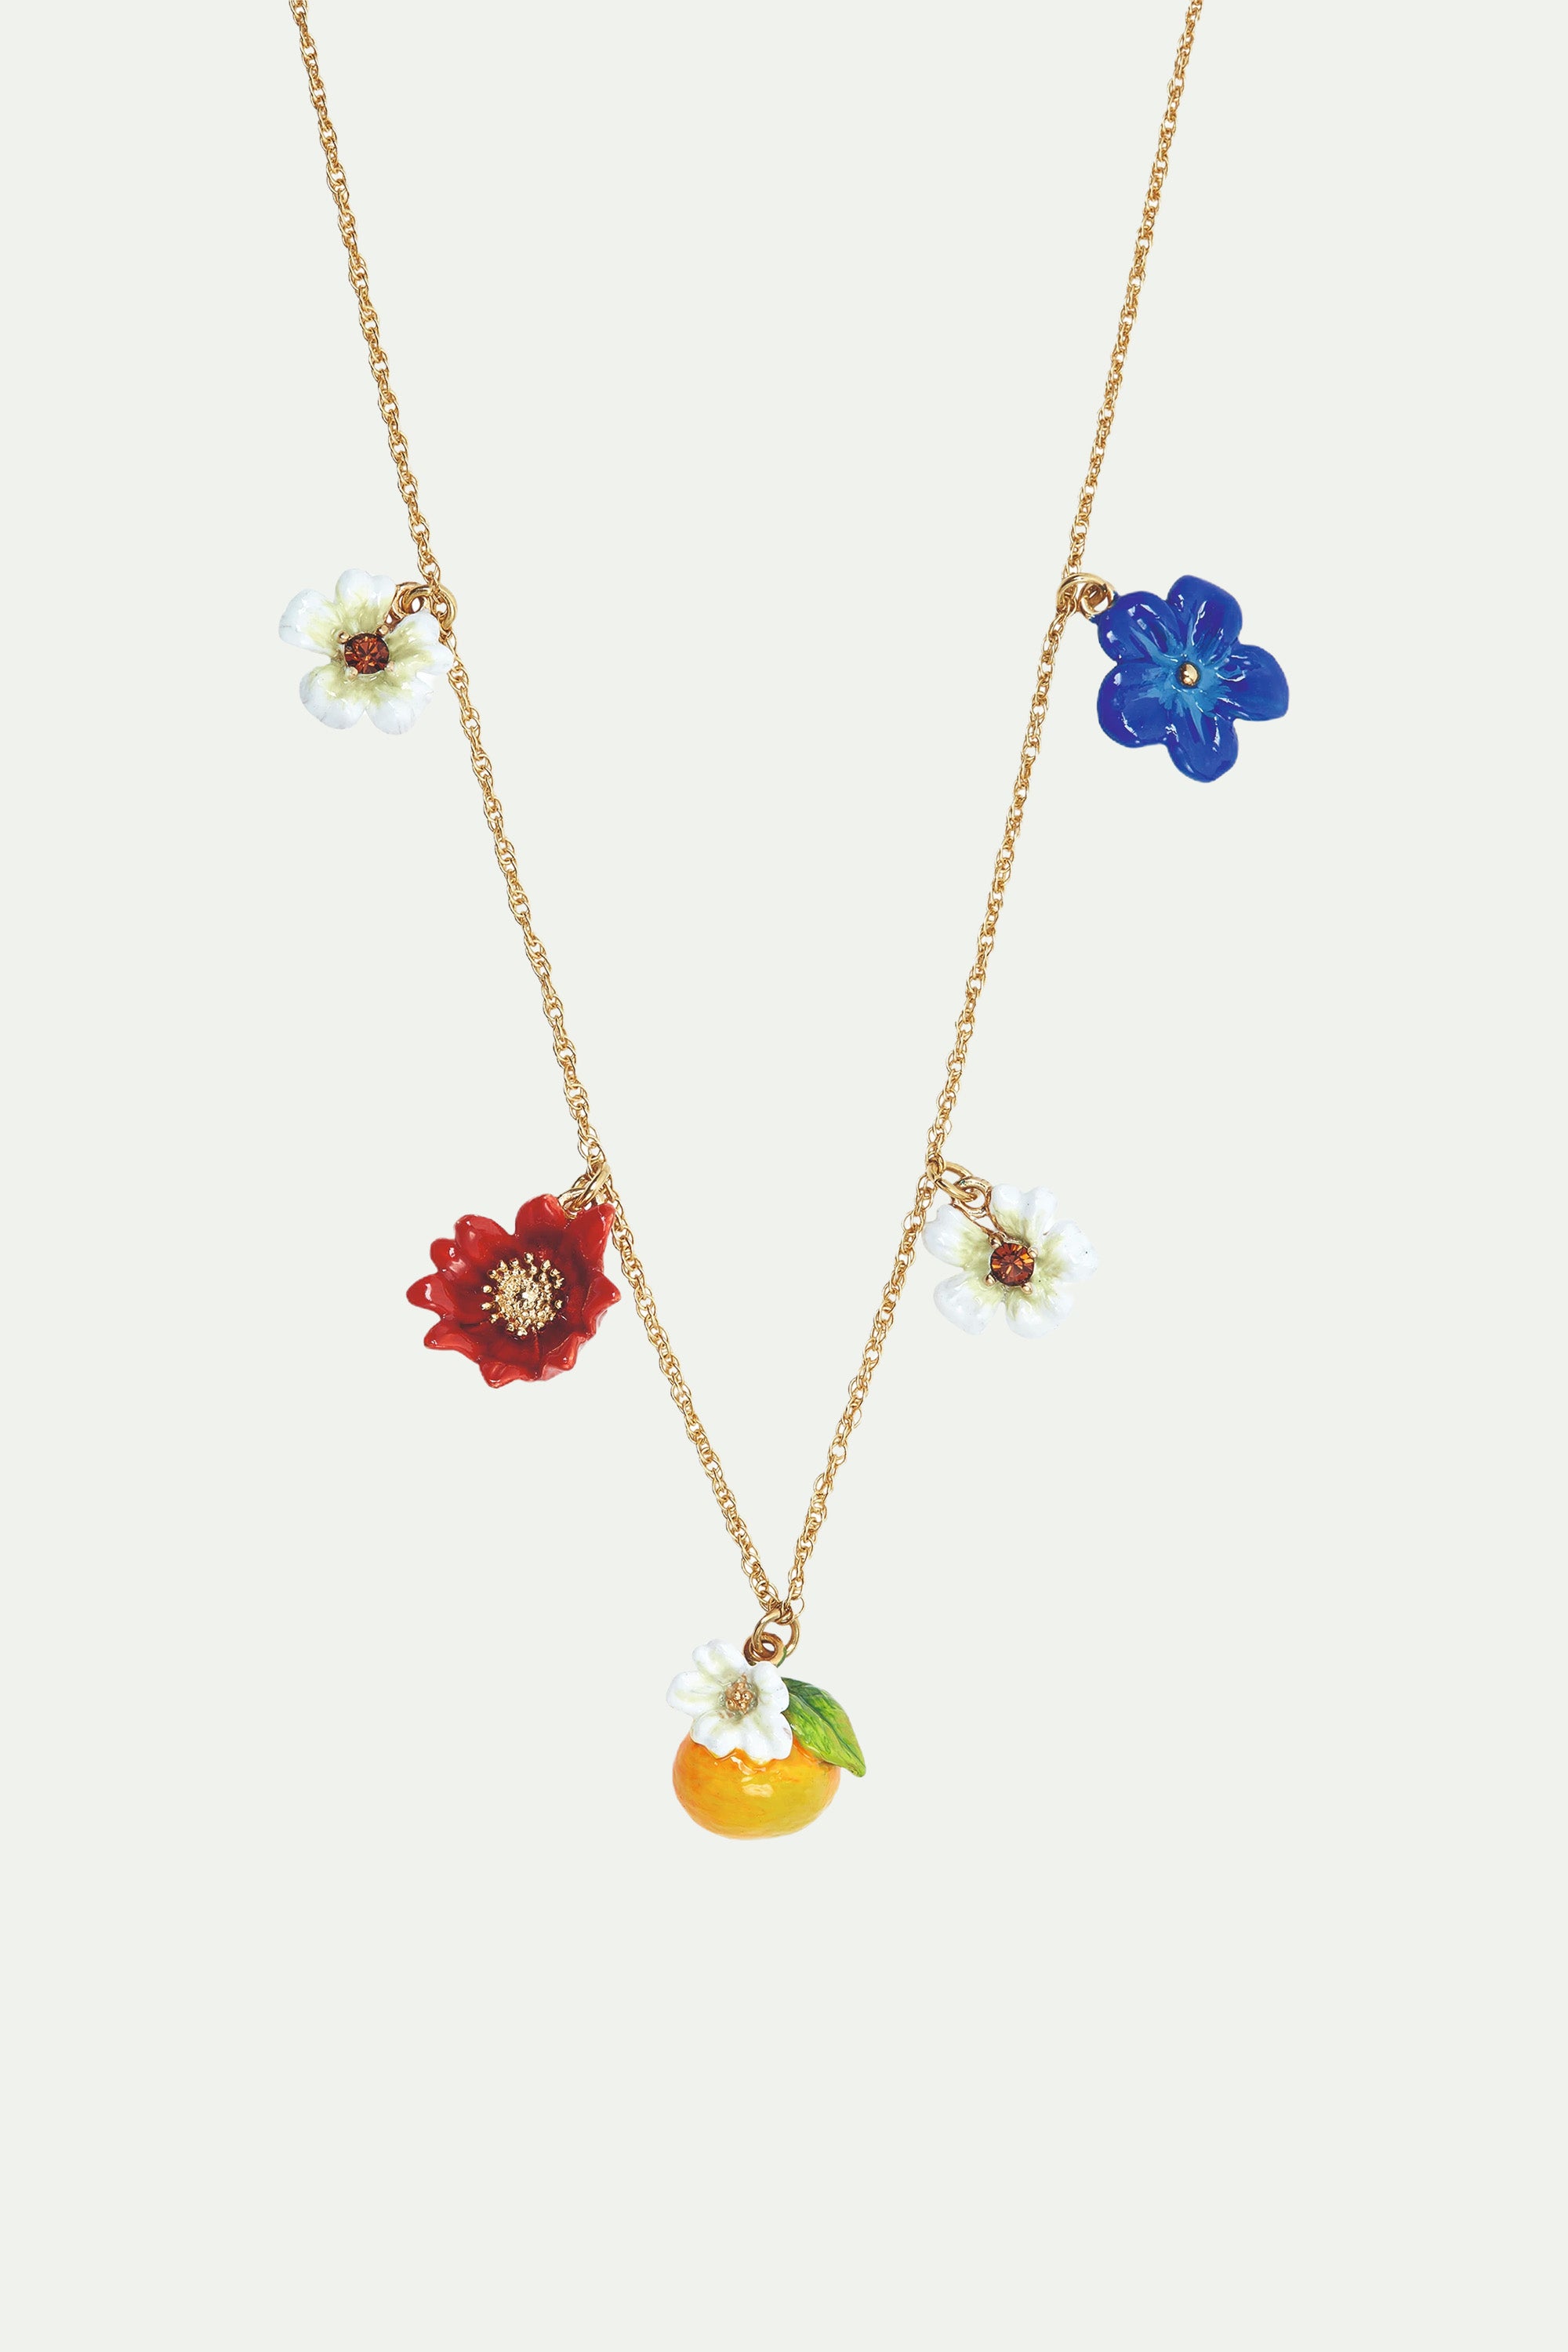 Blue, white and red flowers, clementine and butterfly charm necklace